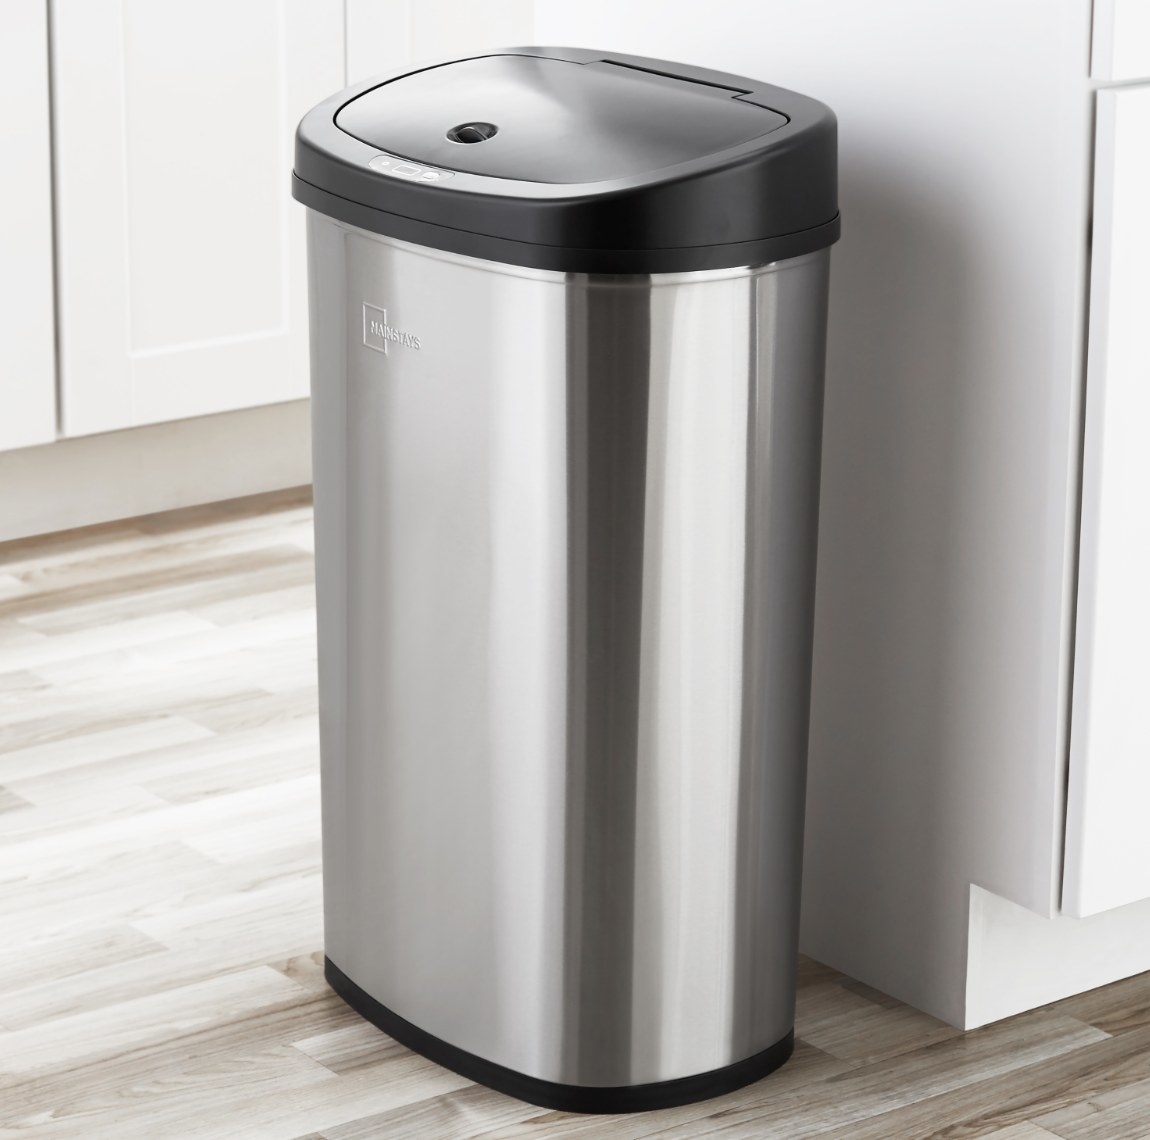 The motion sensor trash can in stainless steel